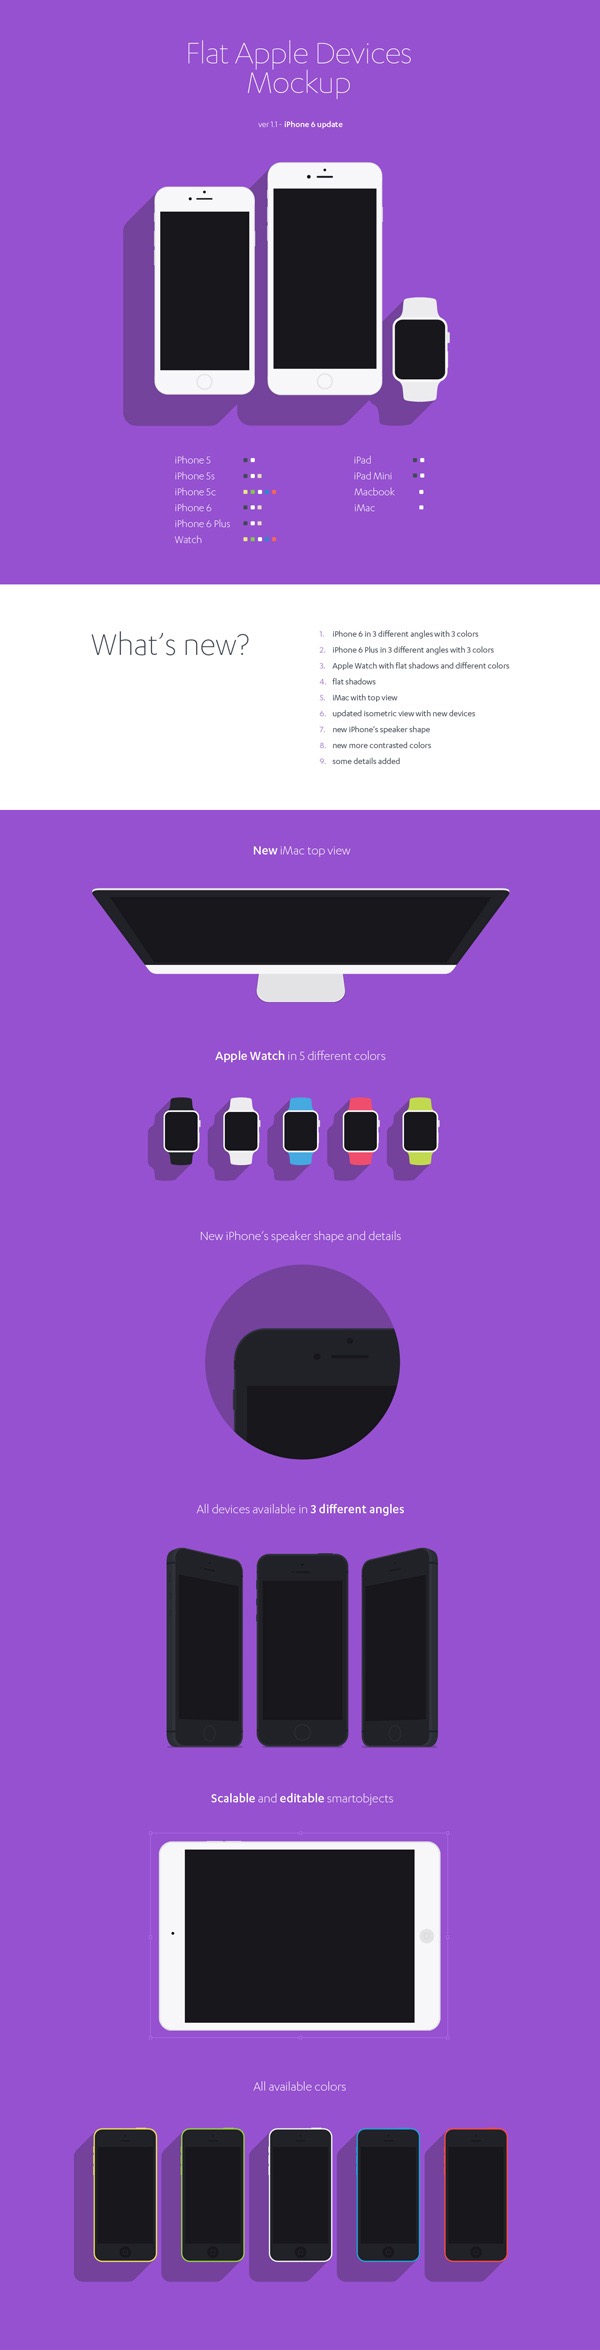 Free Download : Flat Apple Devices Mockup (iPhones, iPads, iMac and Macbook, Apple Watch)